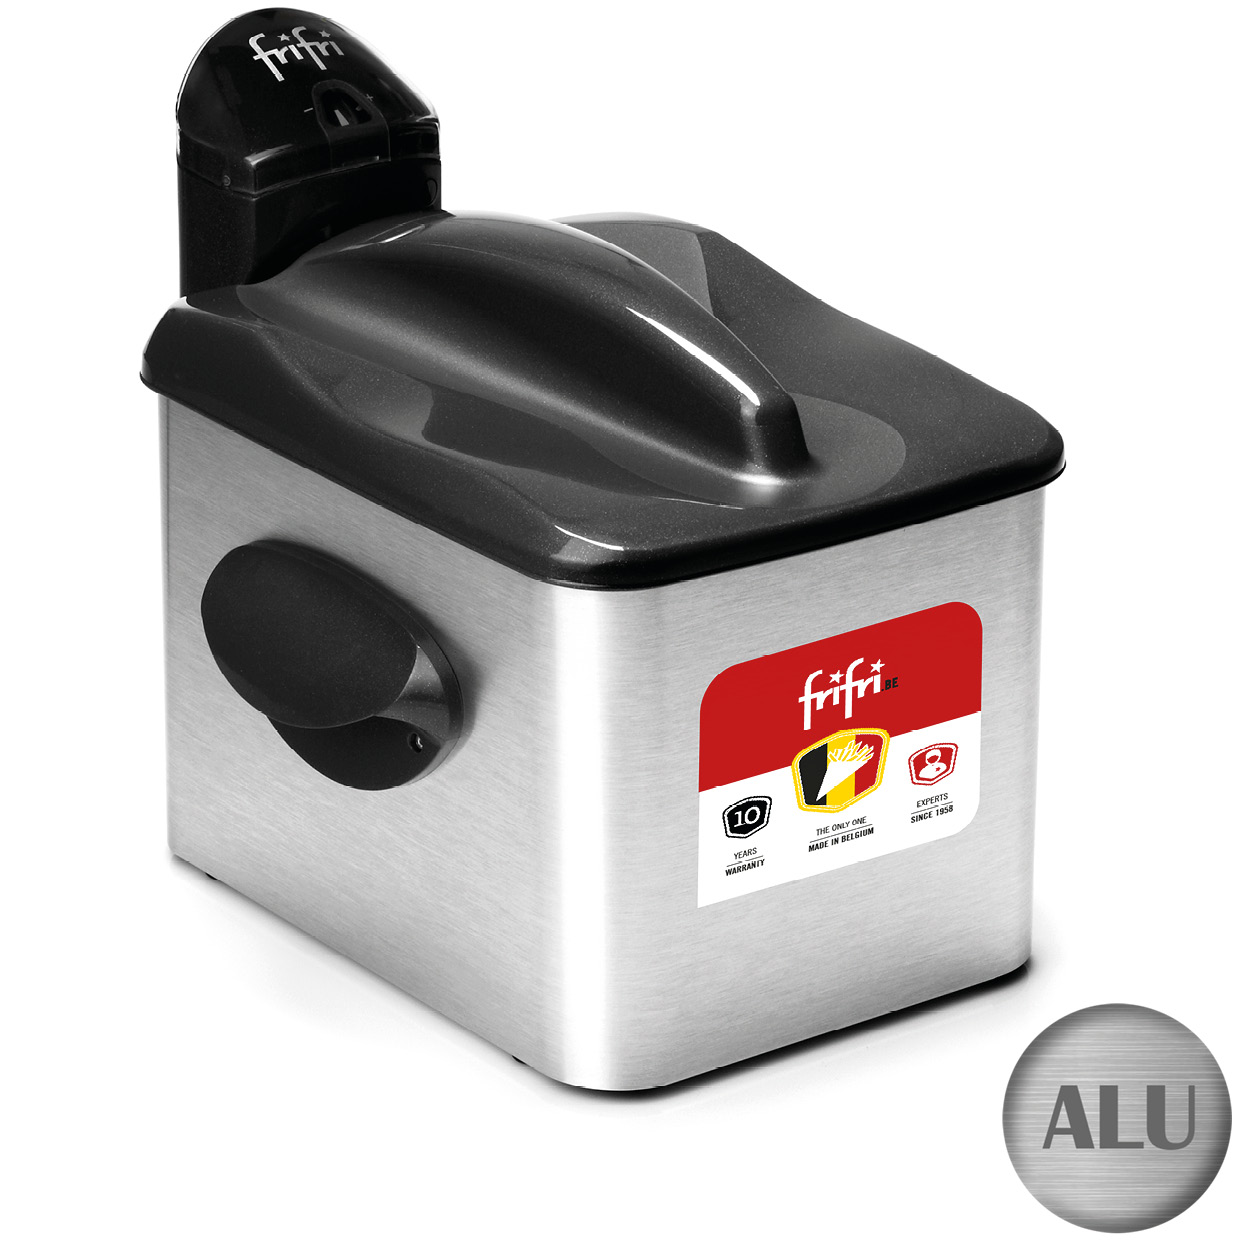 Friteuse FriFri SuperEasy 422 à cuve double [2x7,5-9 ltr / 2x7,5kW]